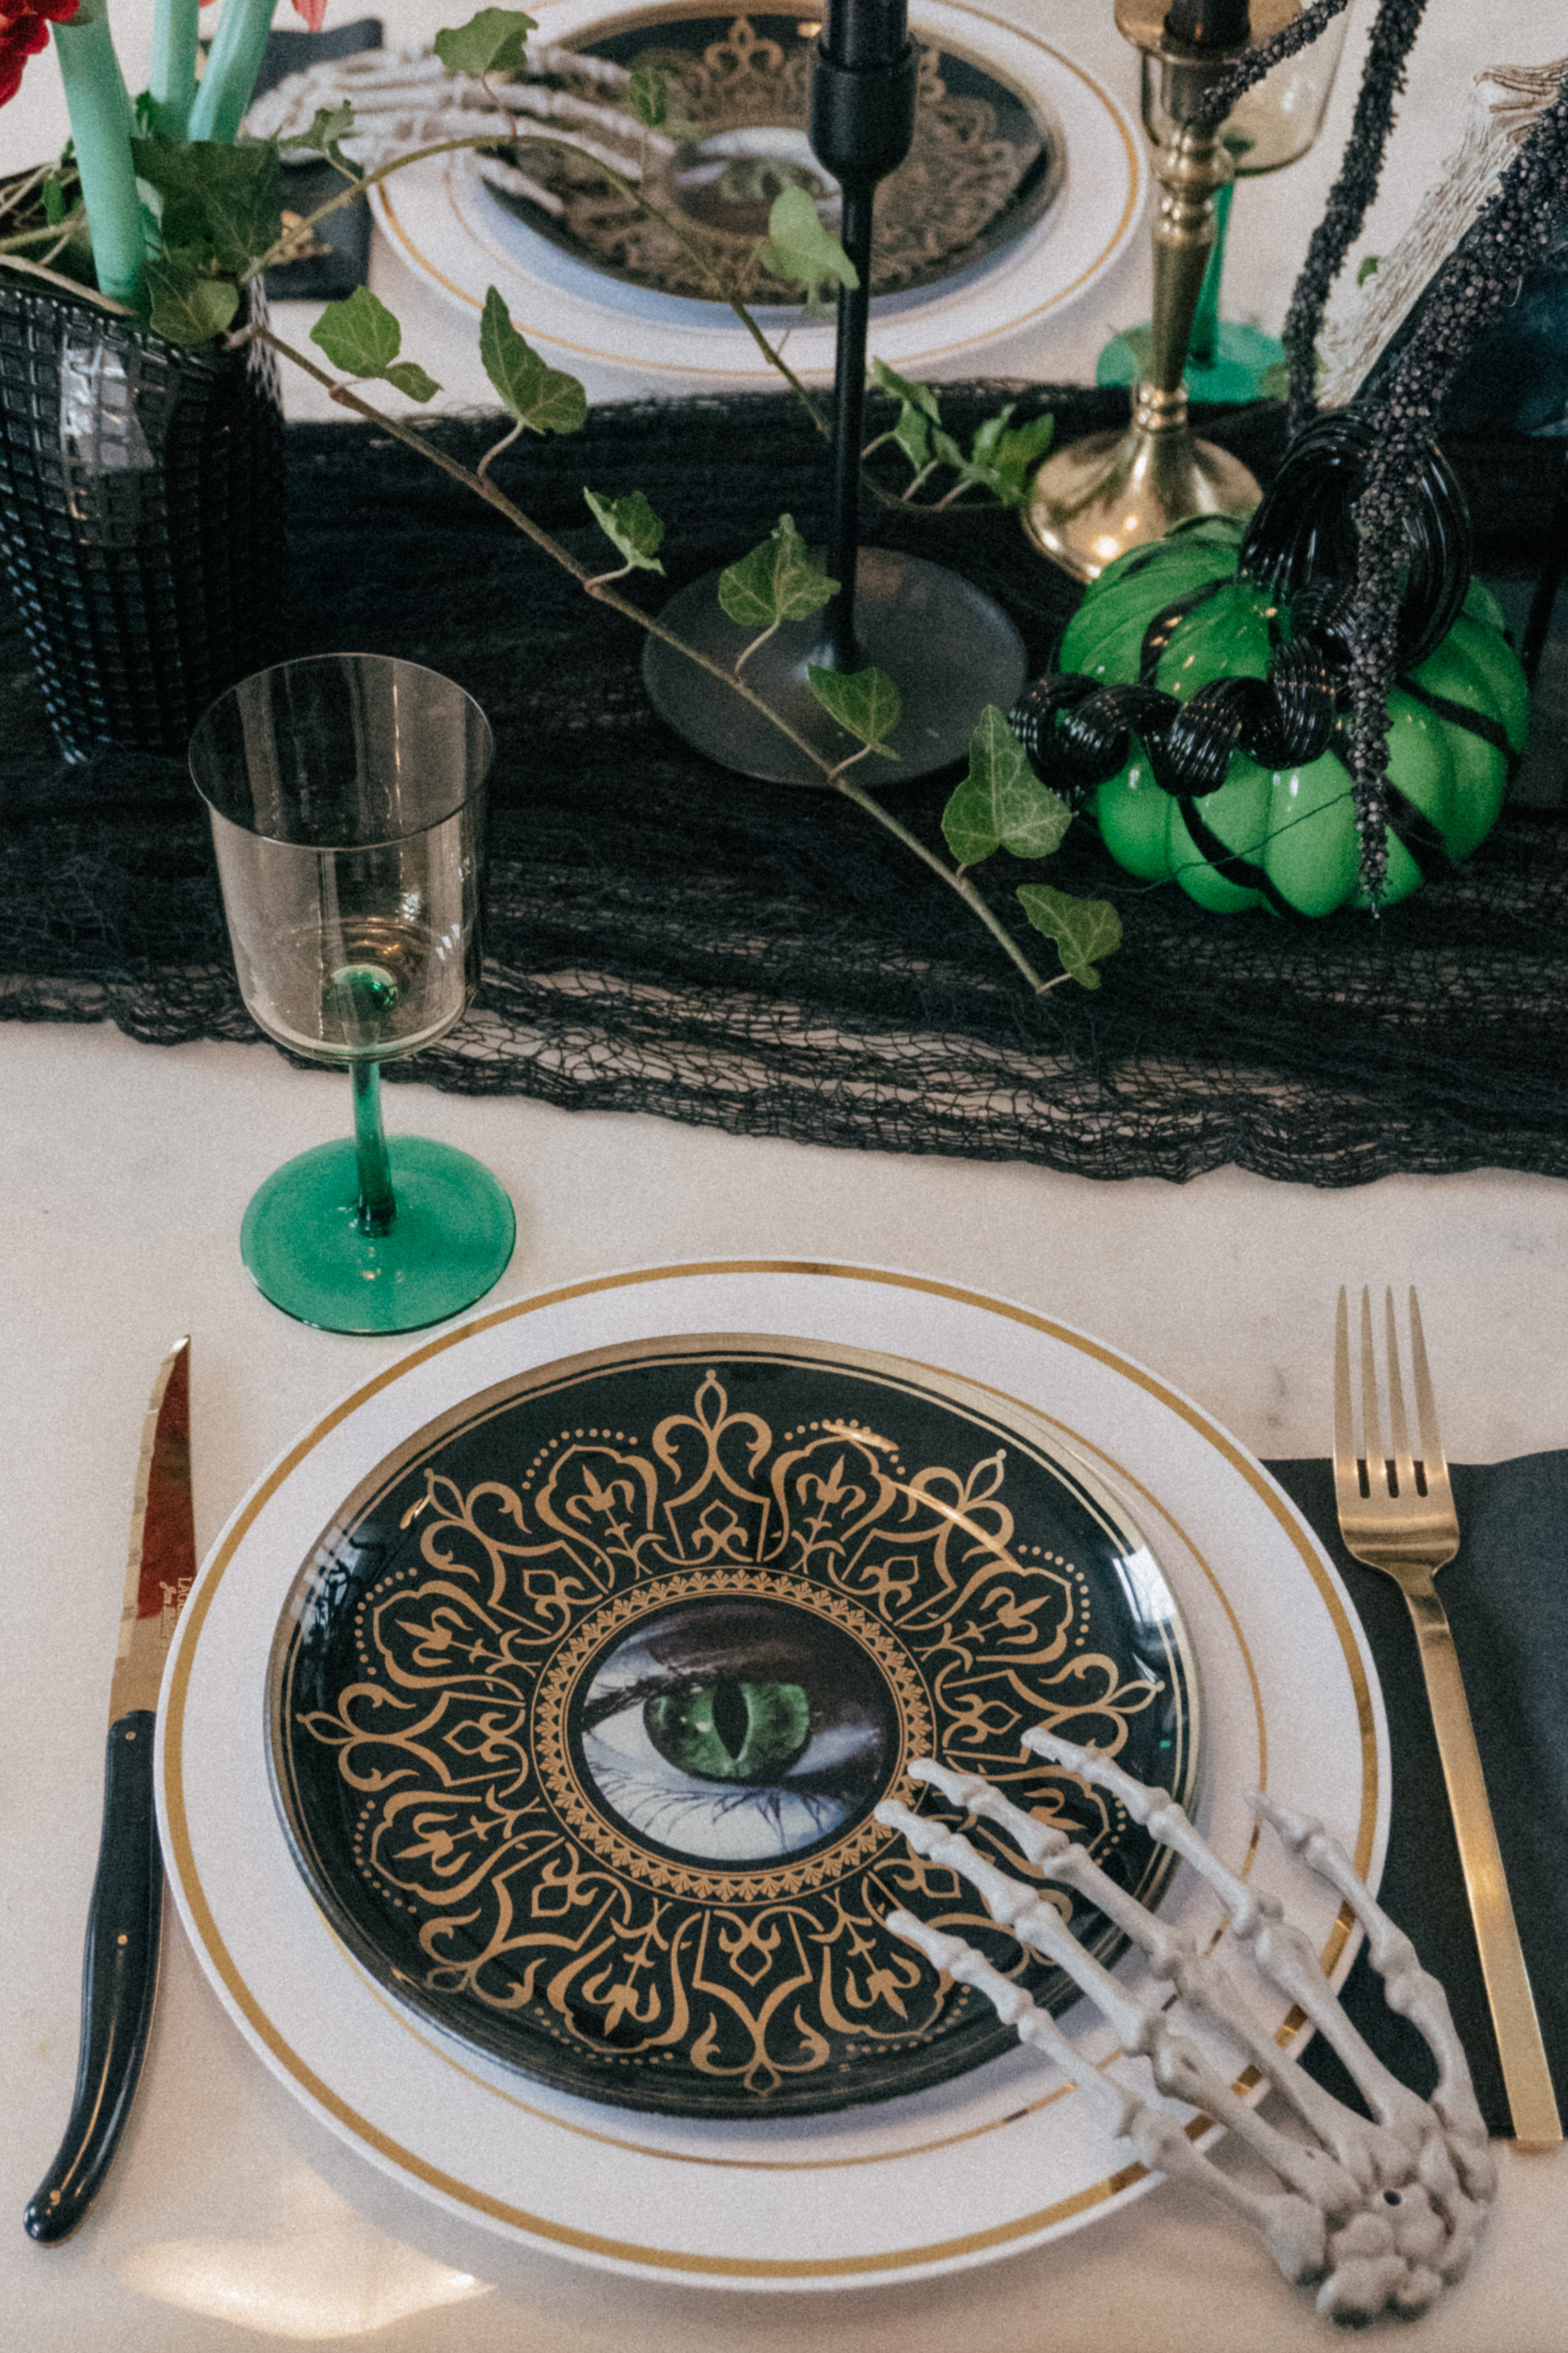 How To Throw A Spooky Last-Minute Halloween Party | Amazon Halloween Party Finds | Halloween Decor for a Last-Minute Party | Halloween Treats for a Last-Minute Halloween Party | Everything You Need to Throw A Halloween Party | Spooky Halloween Decorations | Table Setting with Skeleton hand